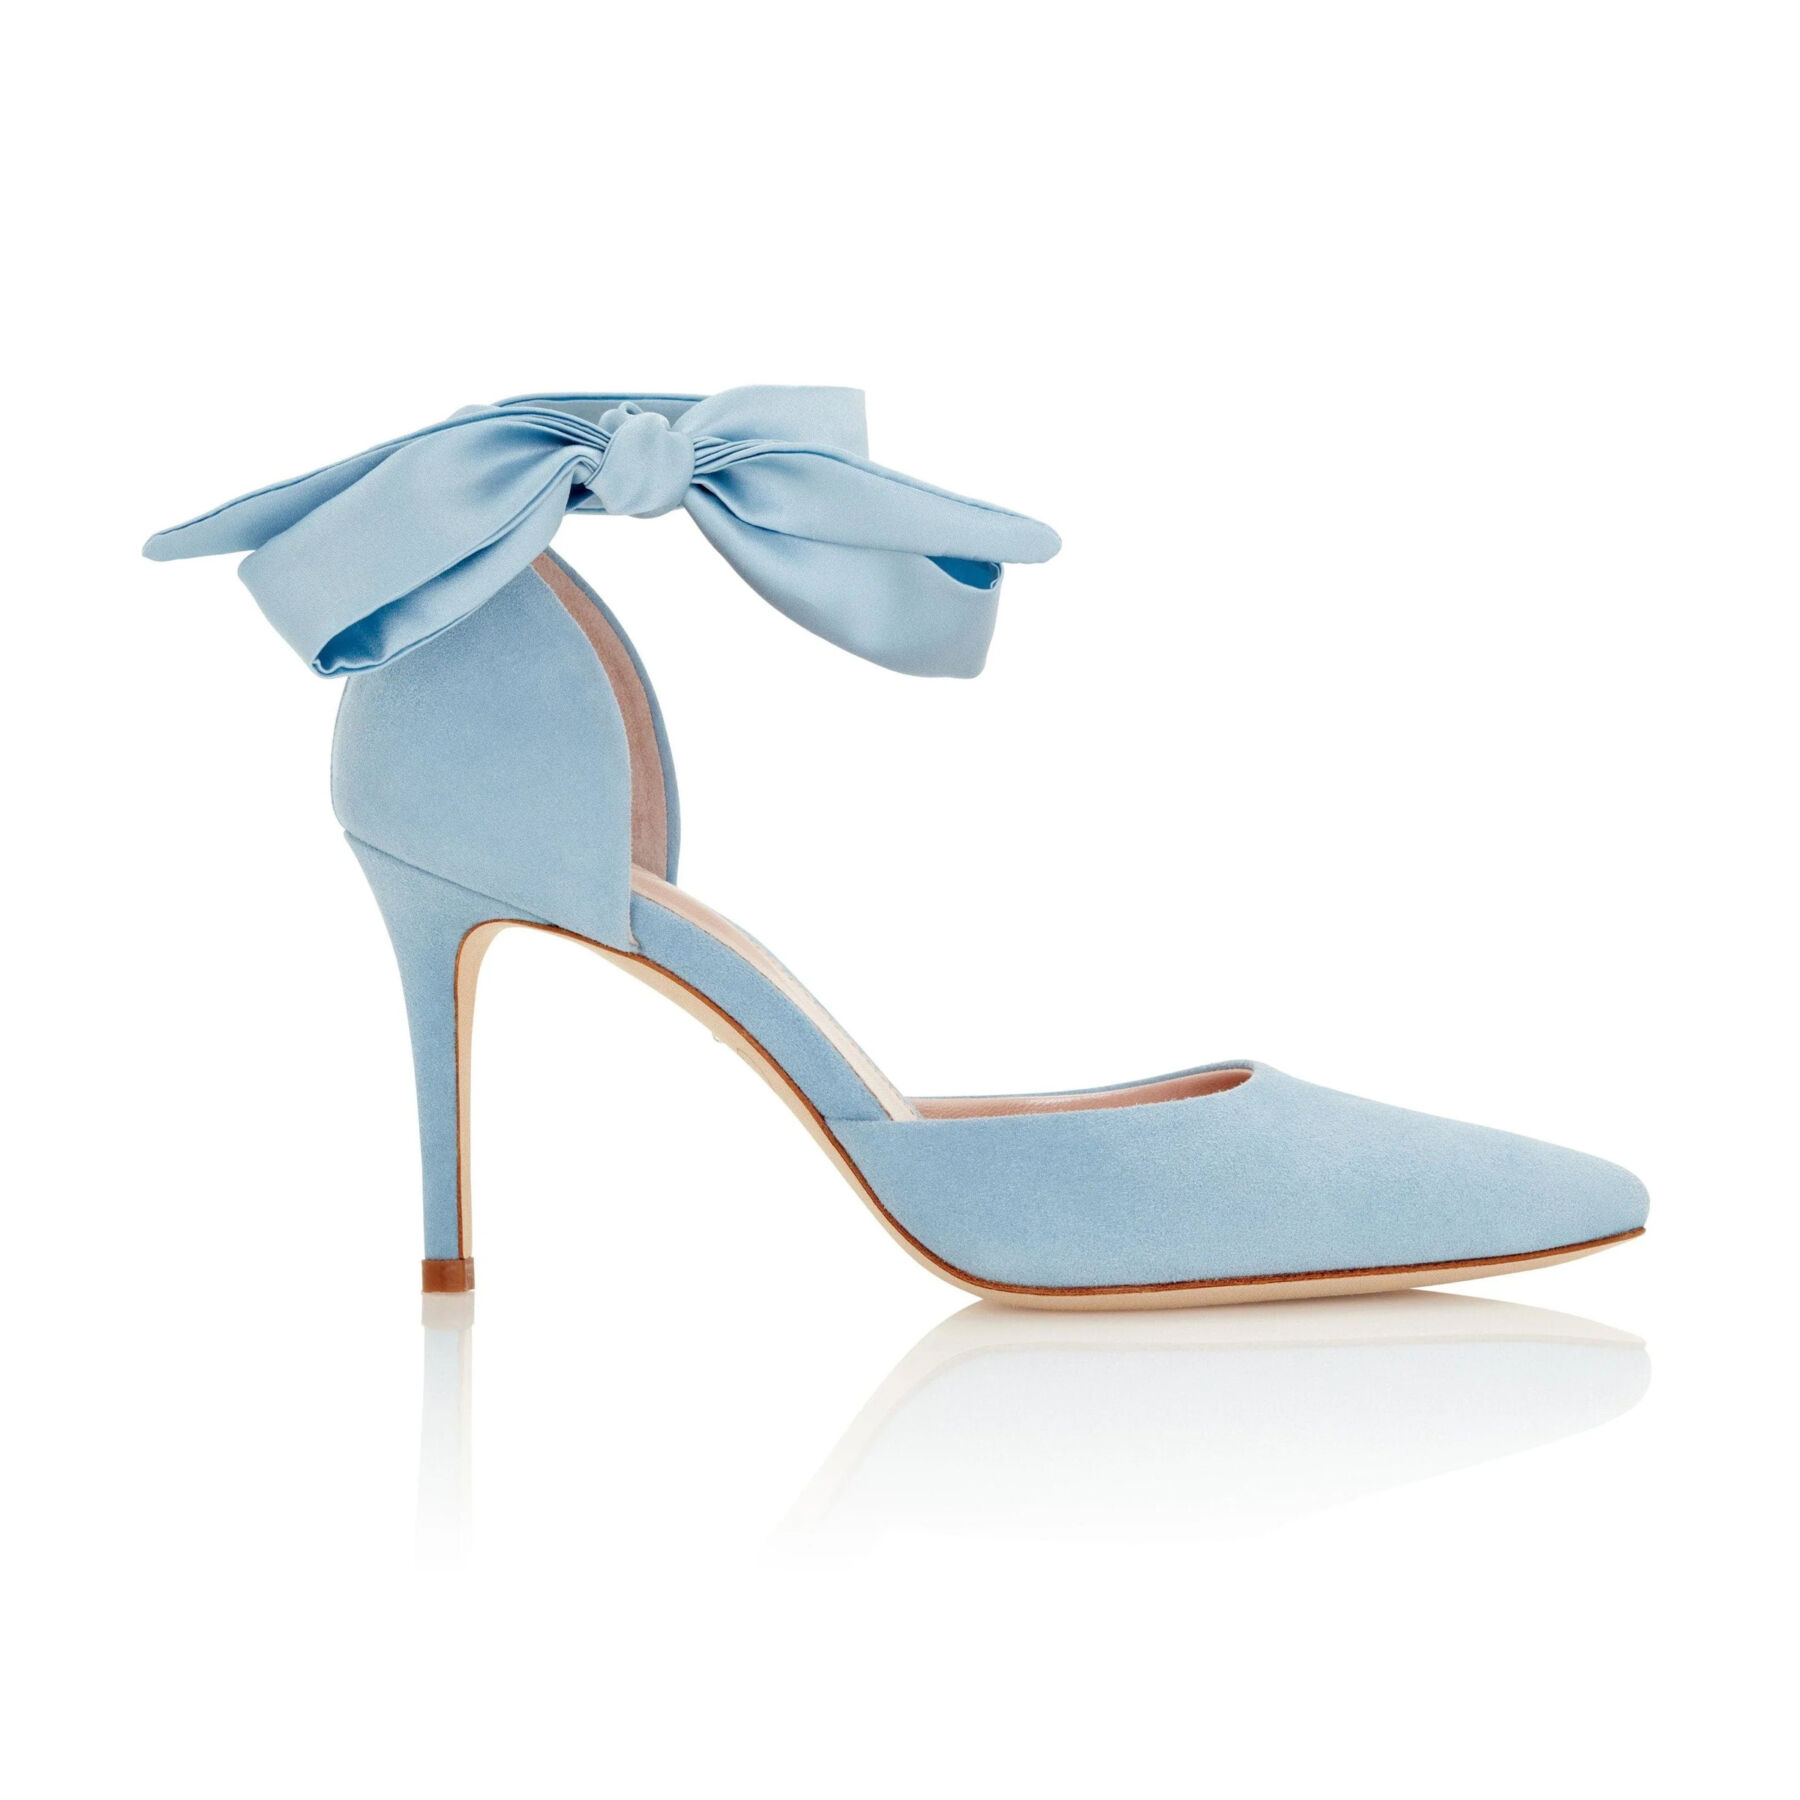 Pale blue wedding shoes by Emmy London